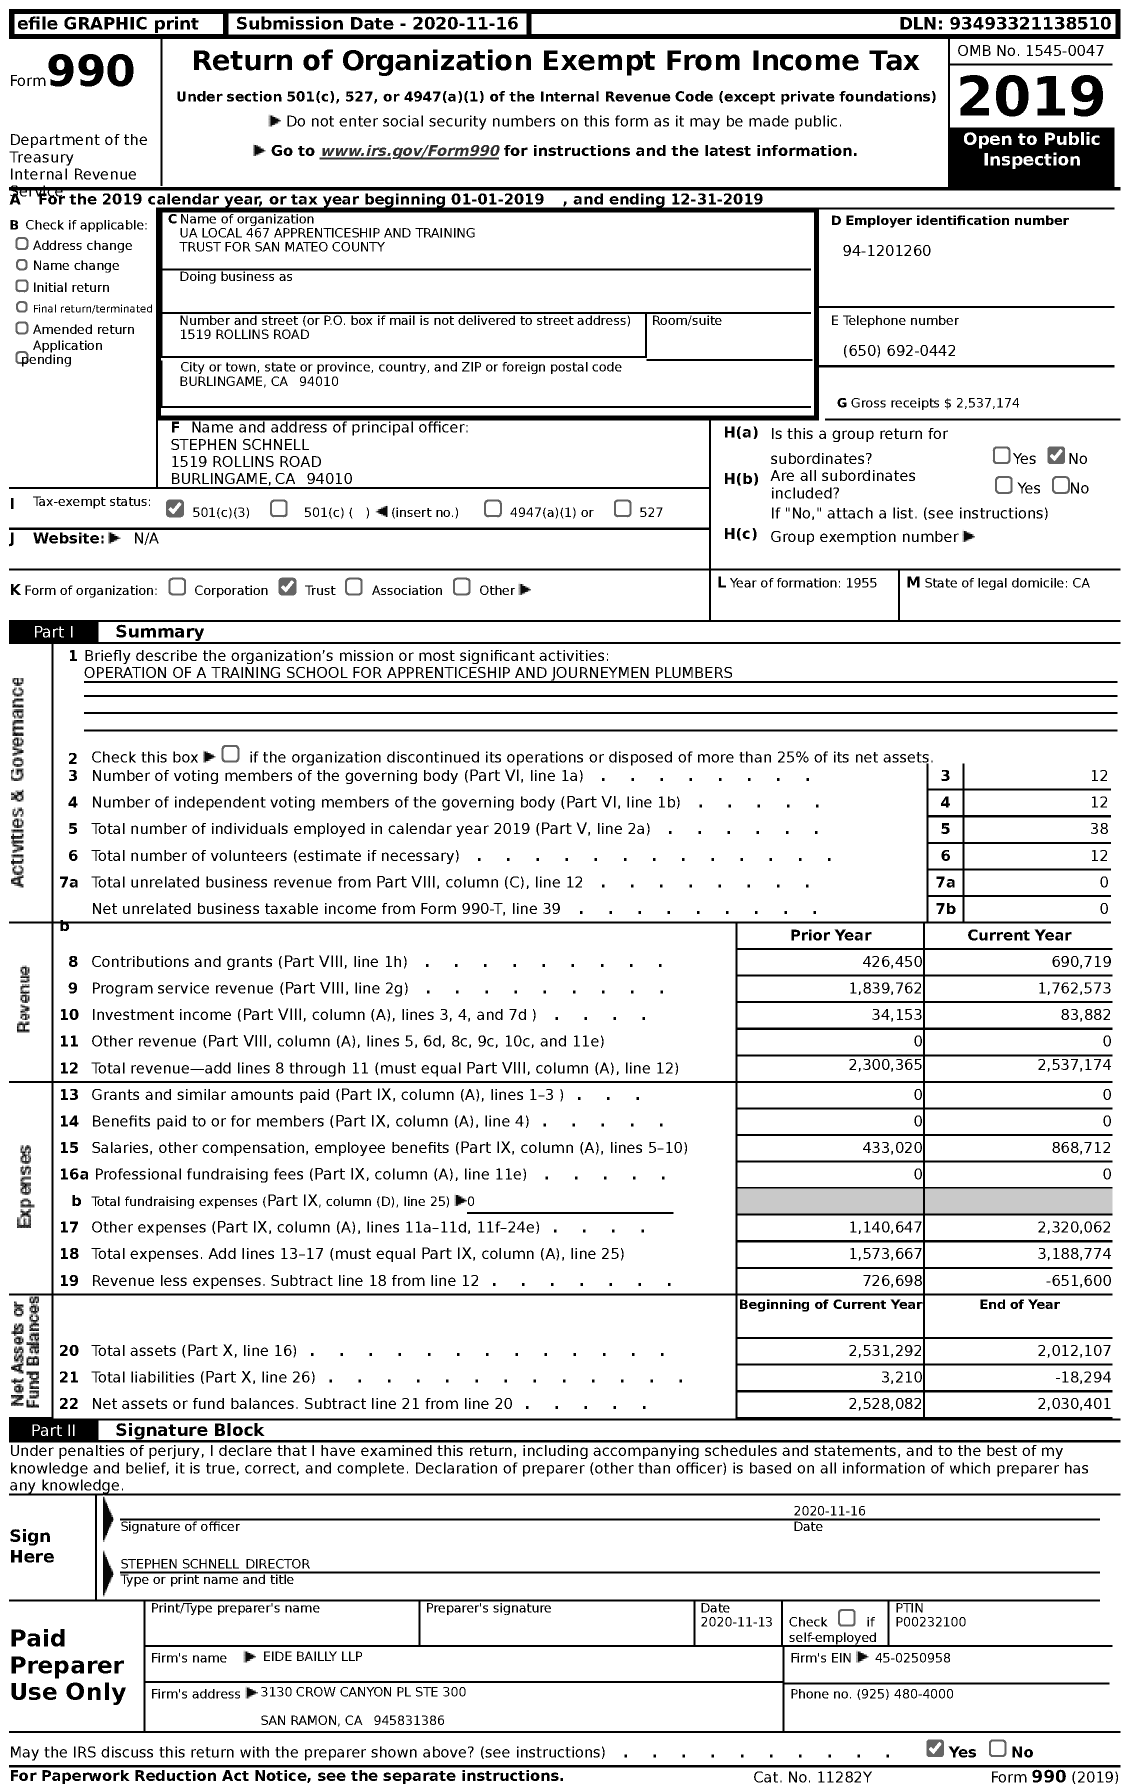 Image of first page of 2019 Form 990 for Ua Local 467 Apprenticeship and Training Trust for San Mateo County